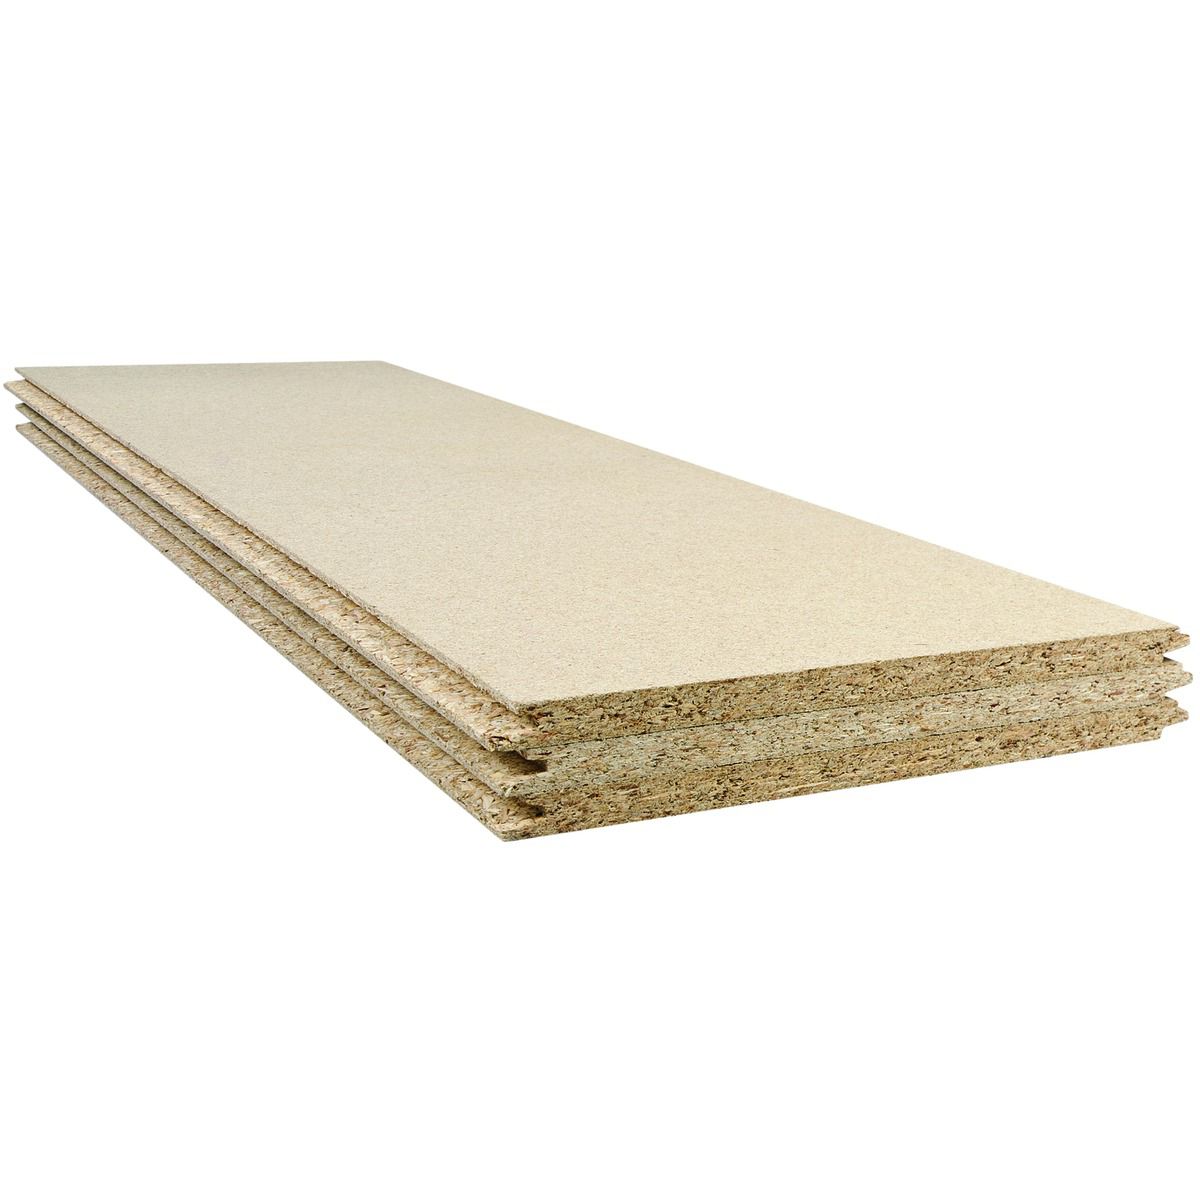 Image of Wickes Tongue and Groove Chipboard Natural Loft Panels - 320x1220mm - Pack of 3